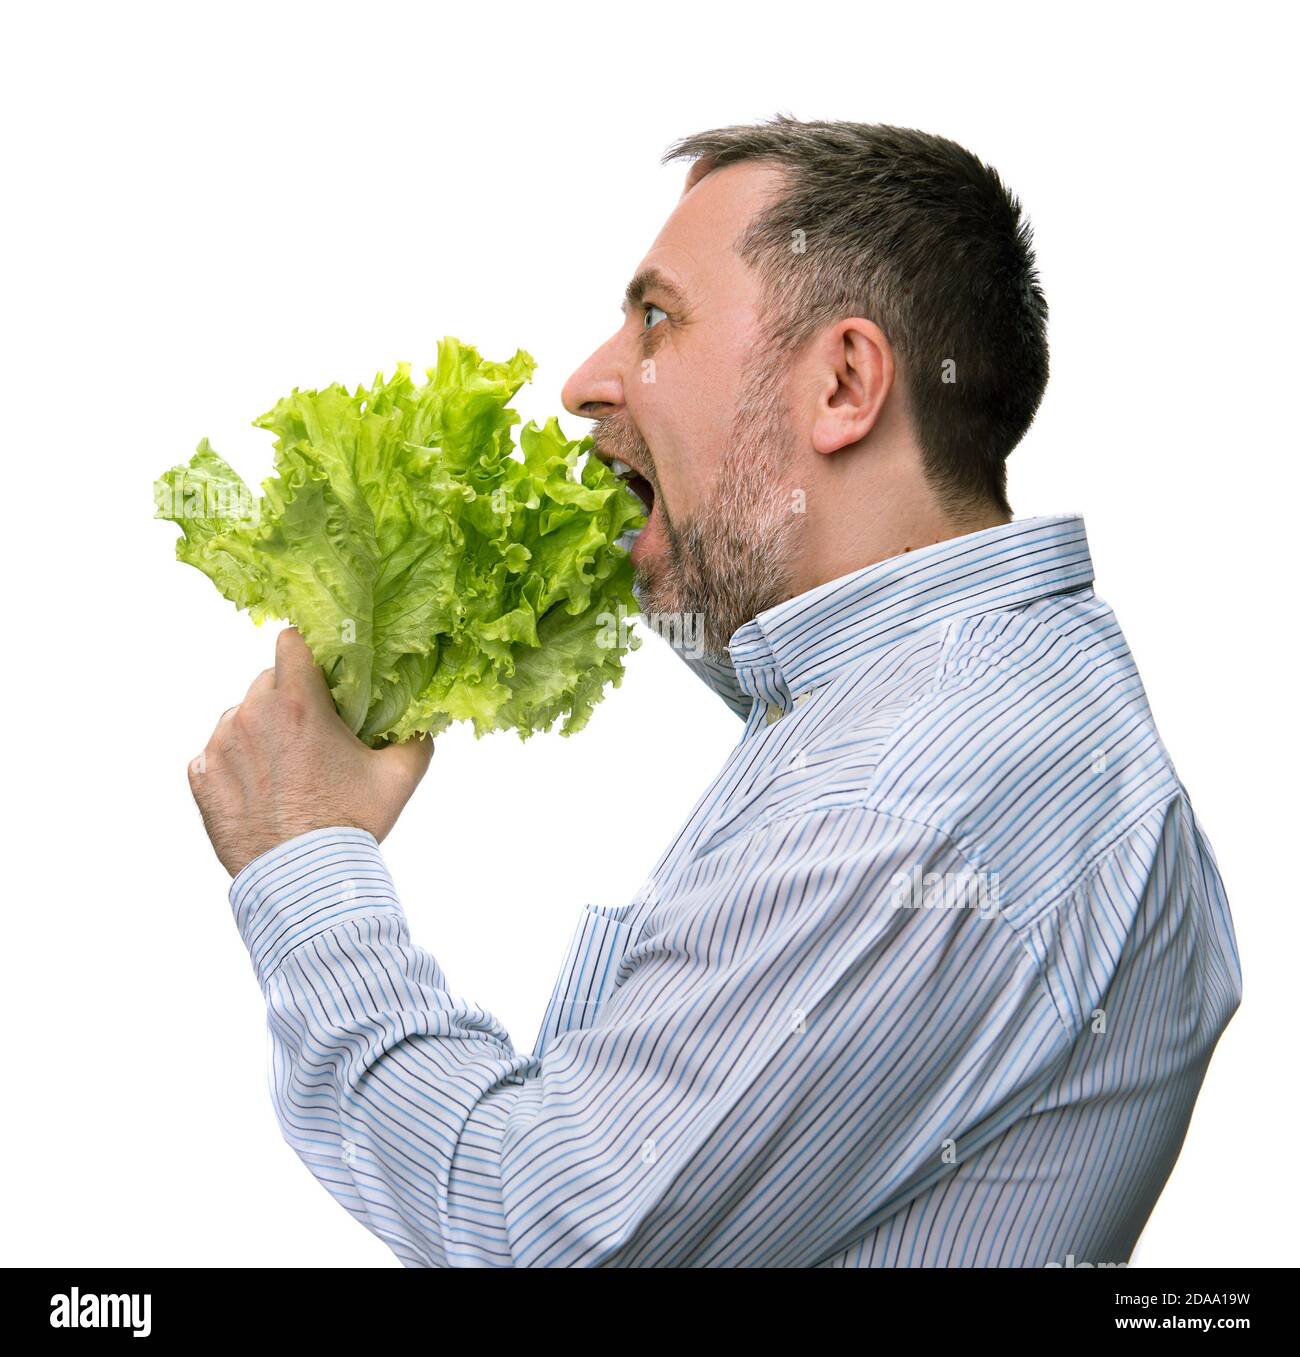 Healthy food. Man holding lettuce isolated on white Stock Photo